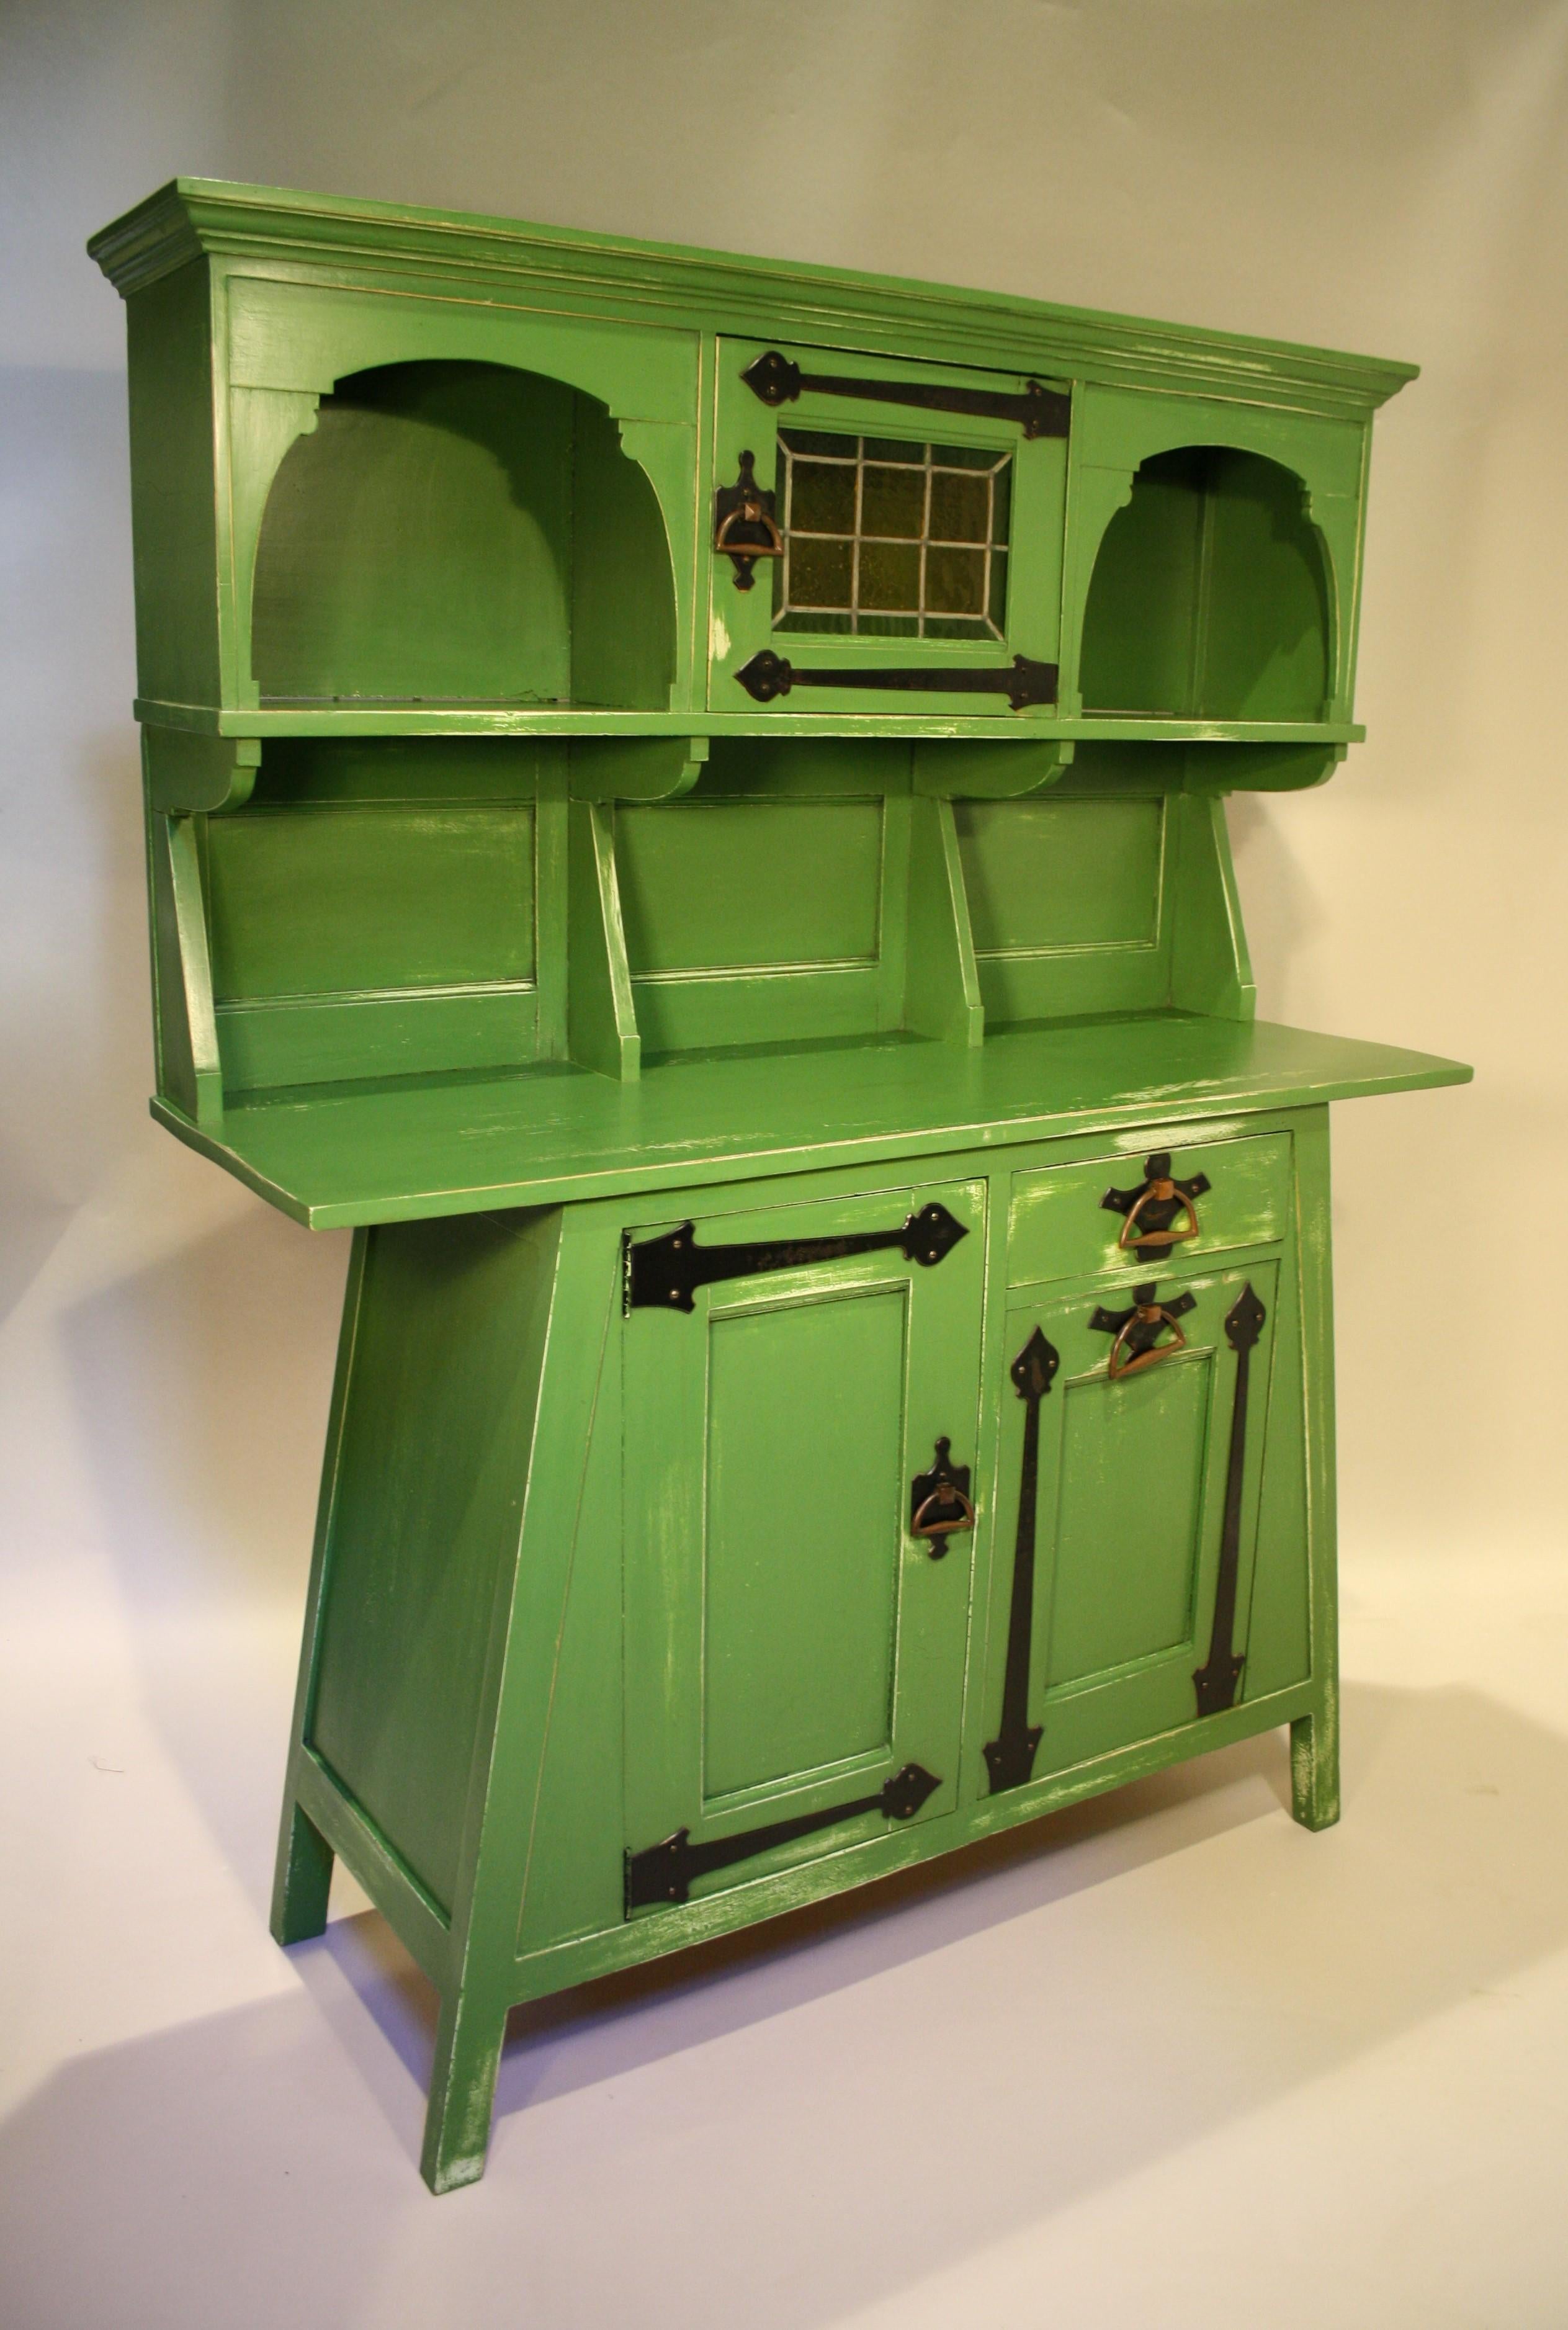 Very special Arts & Crafts cabinet from Leonard Wyburd made from a soft fruit wood.
This type of wood was used for painted furniture and in this case designed for a kitchen.
Similar designs are known but from a different type of wood previously